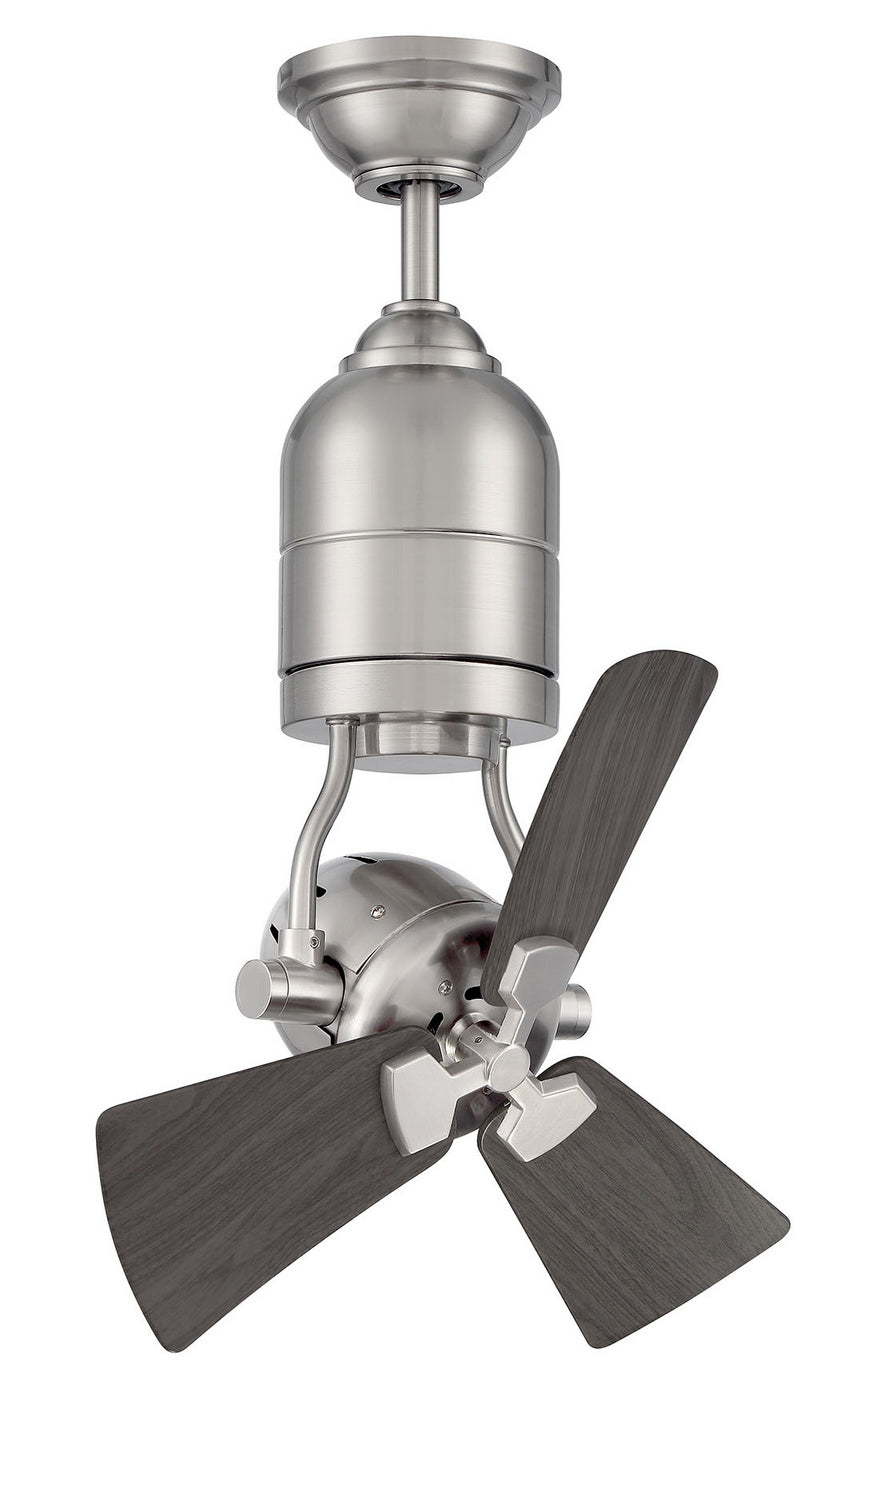 Craftmade Bellows Uno BW318PN3 Ceiling Fan 18 - Painted Nickel, Greywood/Greywood/